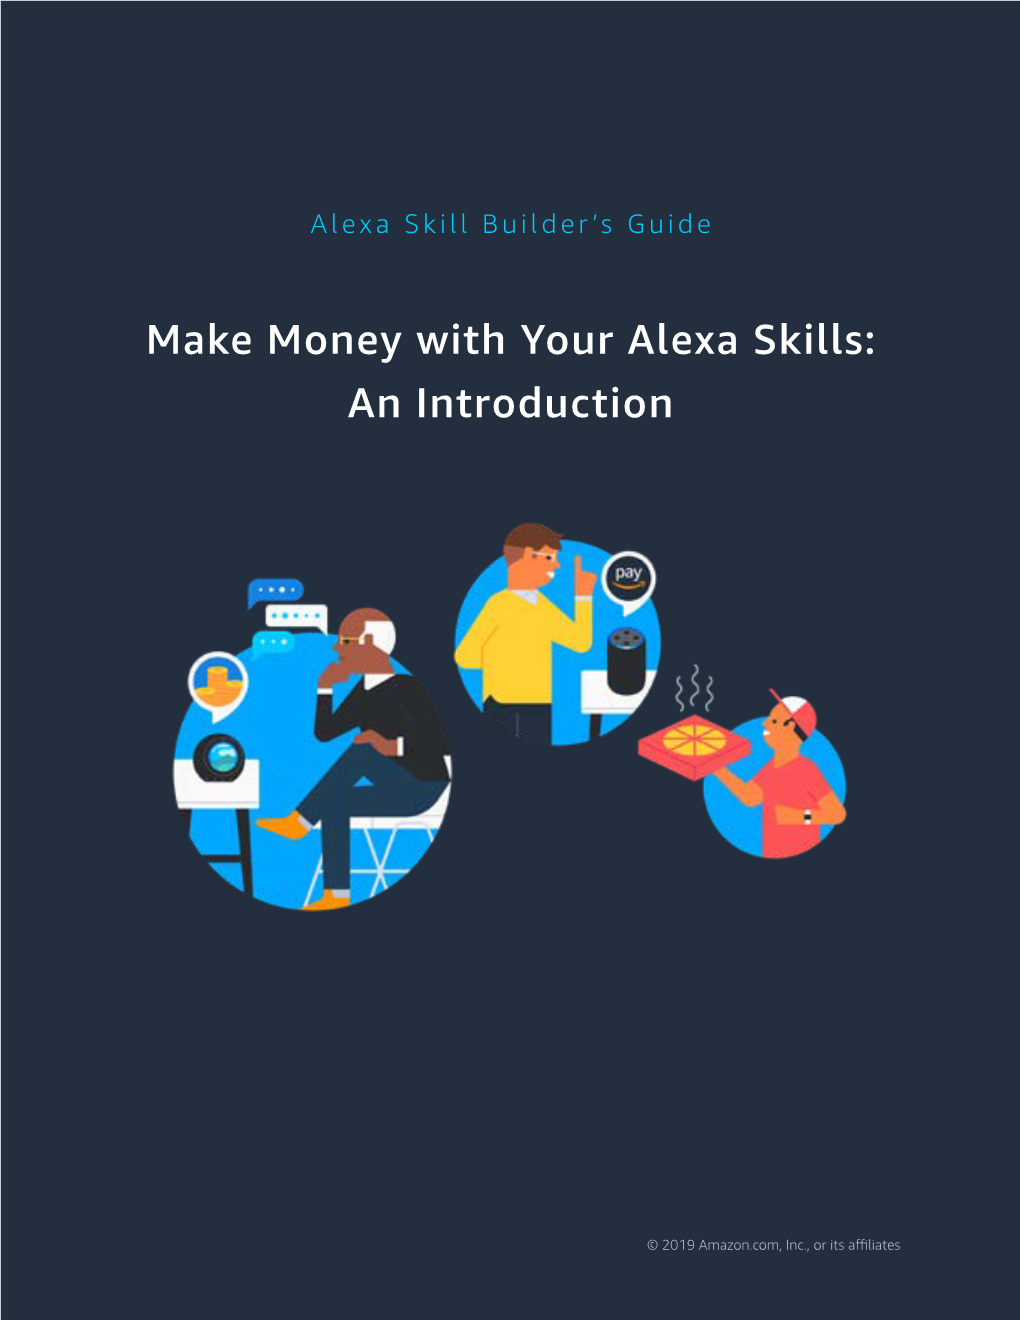 Make Money with Your Alexa Skills: an Introduction